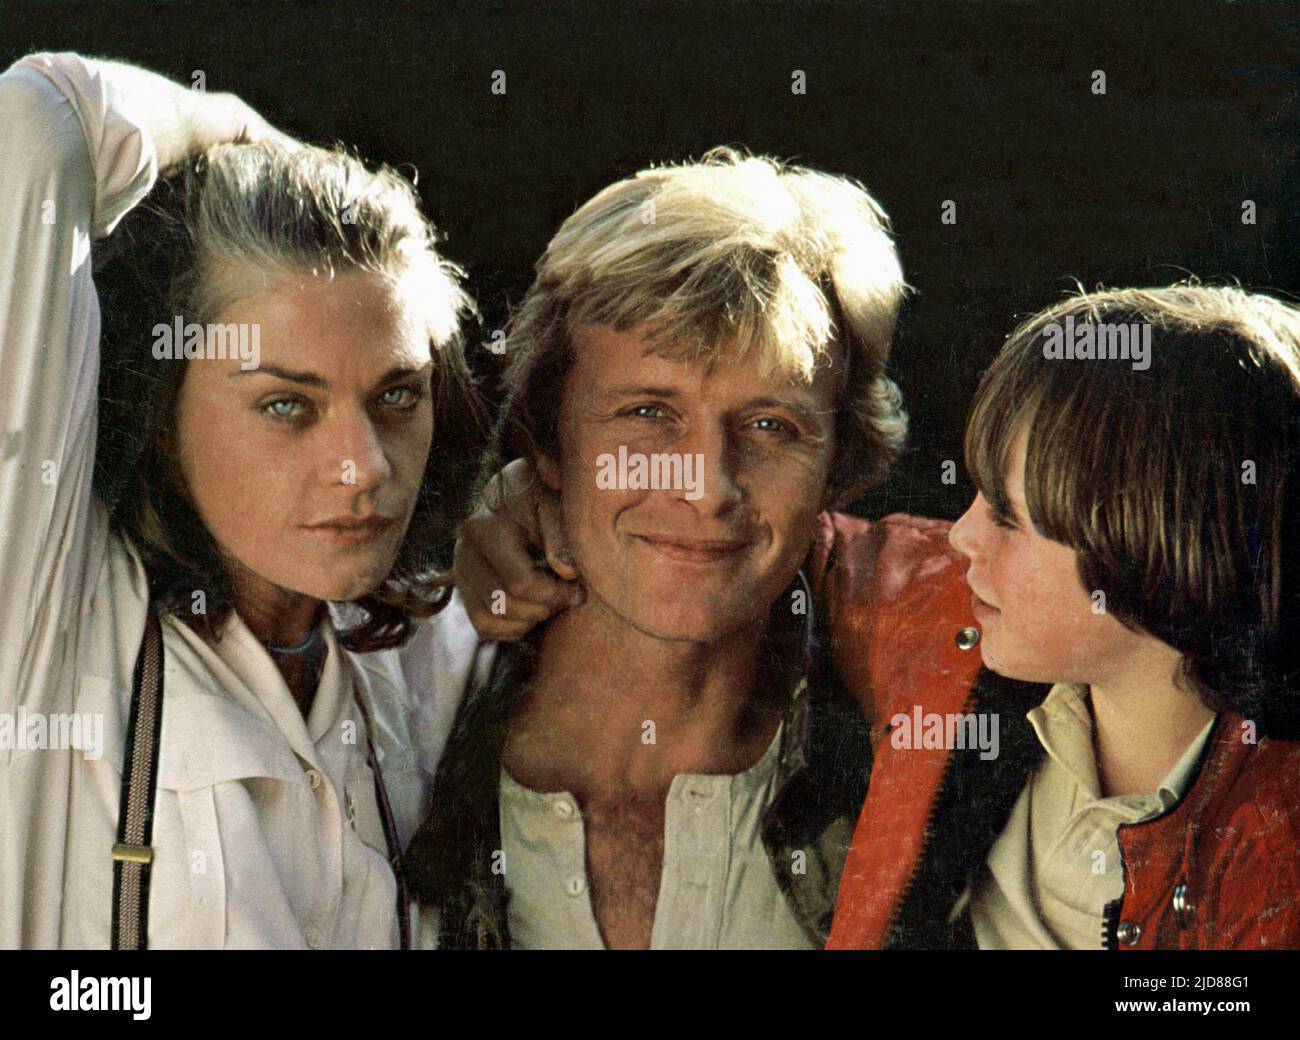 FOSTER,HAUER,STARR, THE OSTERMAN WEEKEND, 1983, Stock Photo